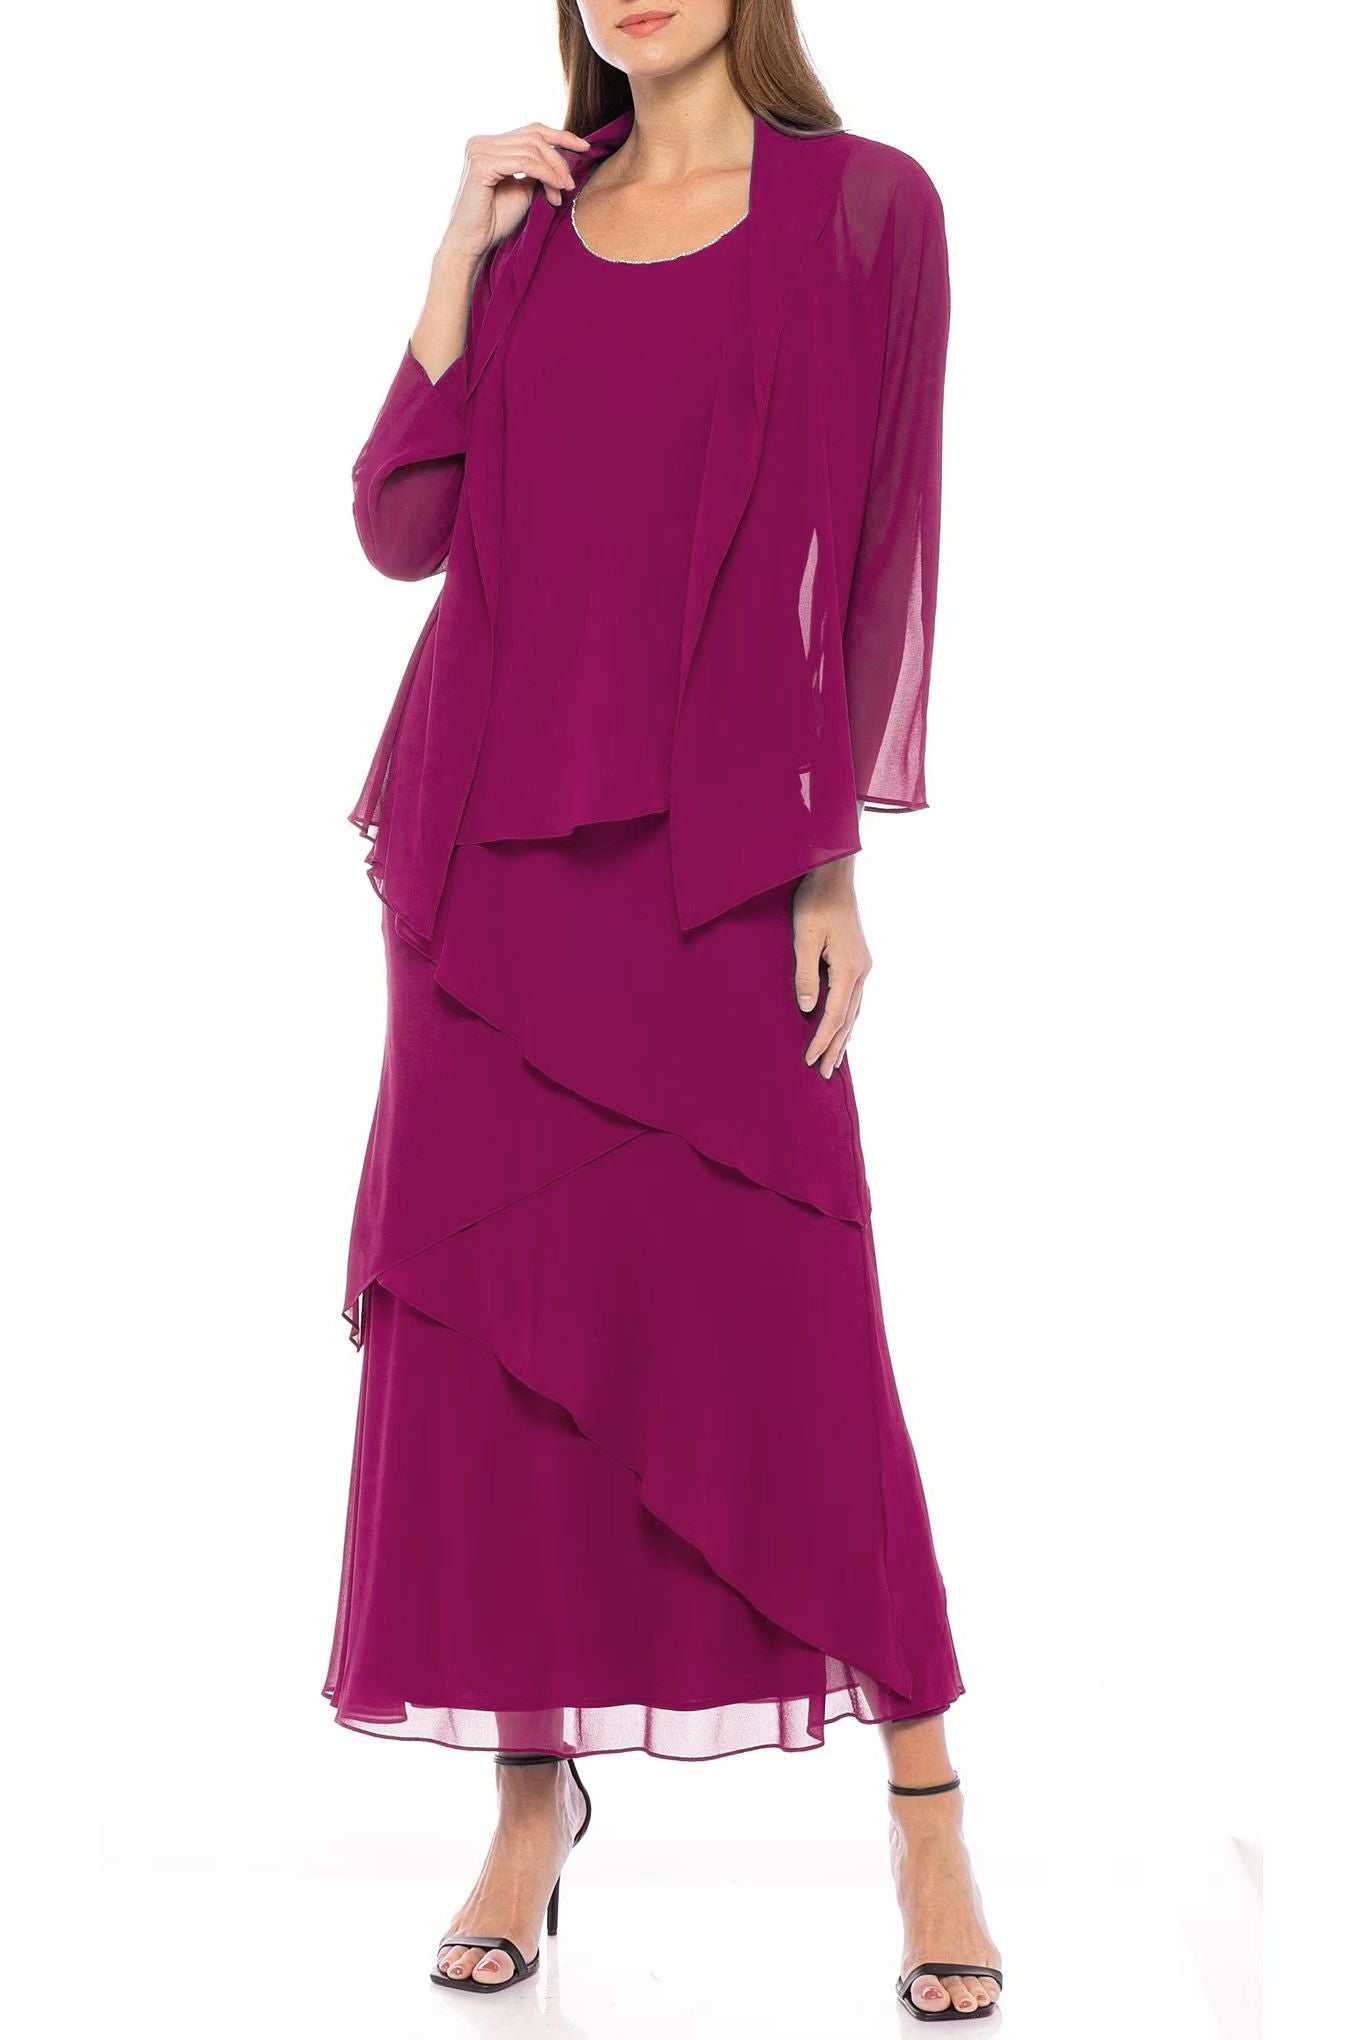 Mother of the Bride Dresses Tiered Solid Chiffon Dress with Matching Jacket Set Fuchsia